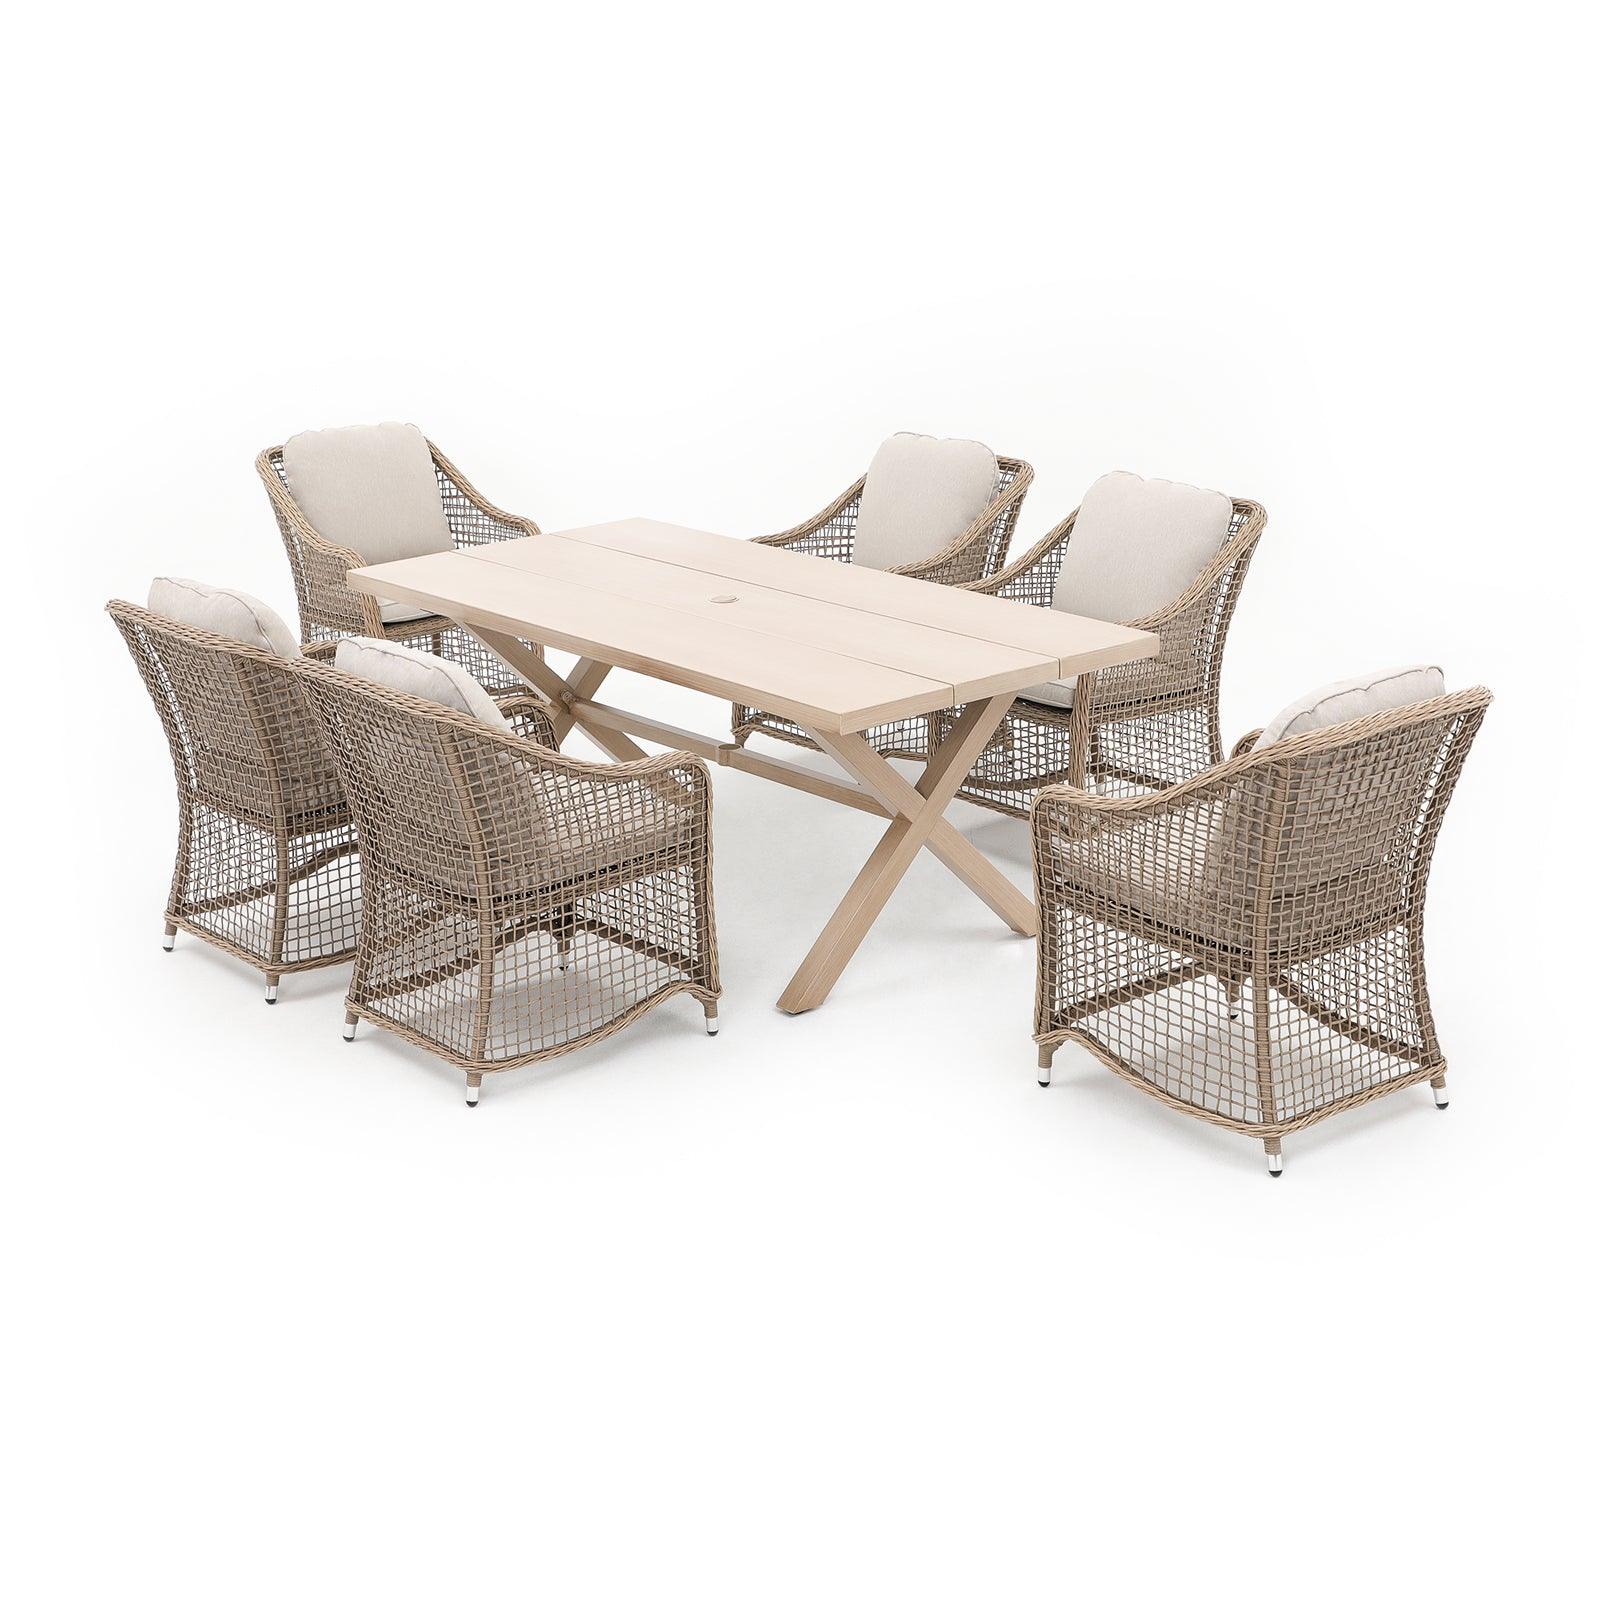 Irati natural color outdoor dining set #color_Natural #Pieces_7-pc.